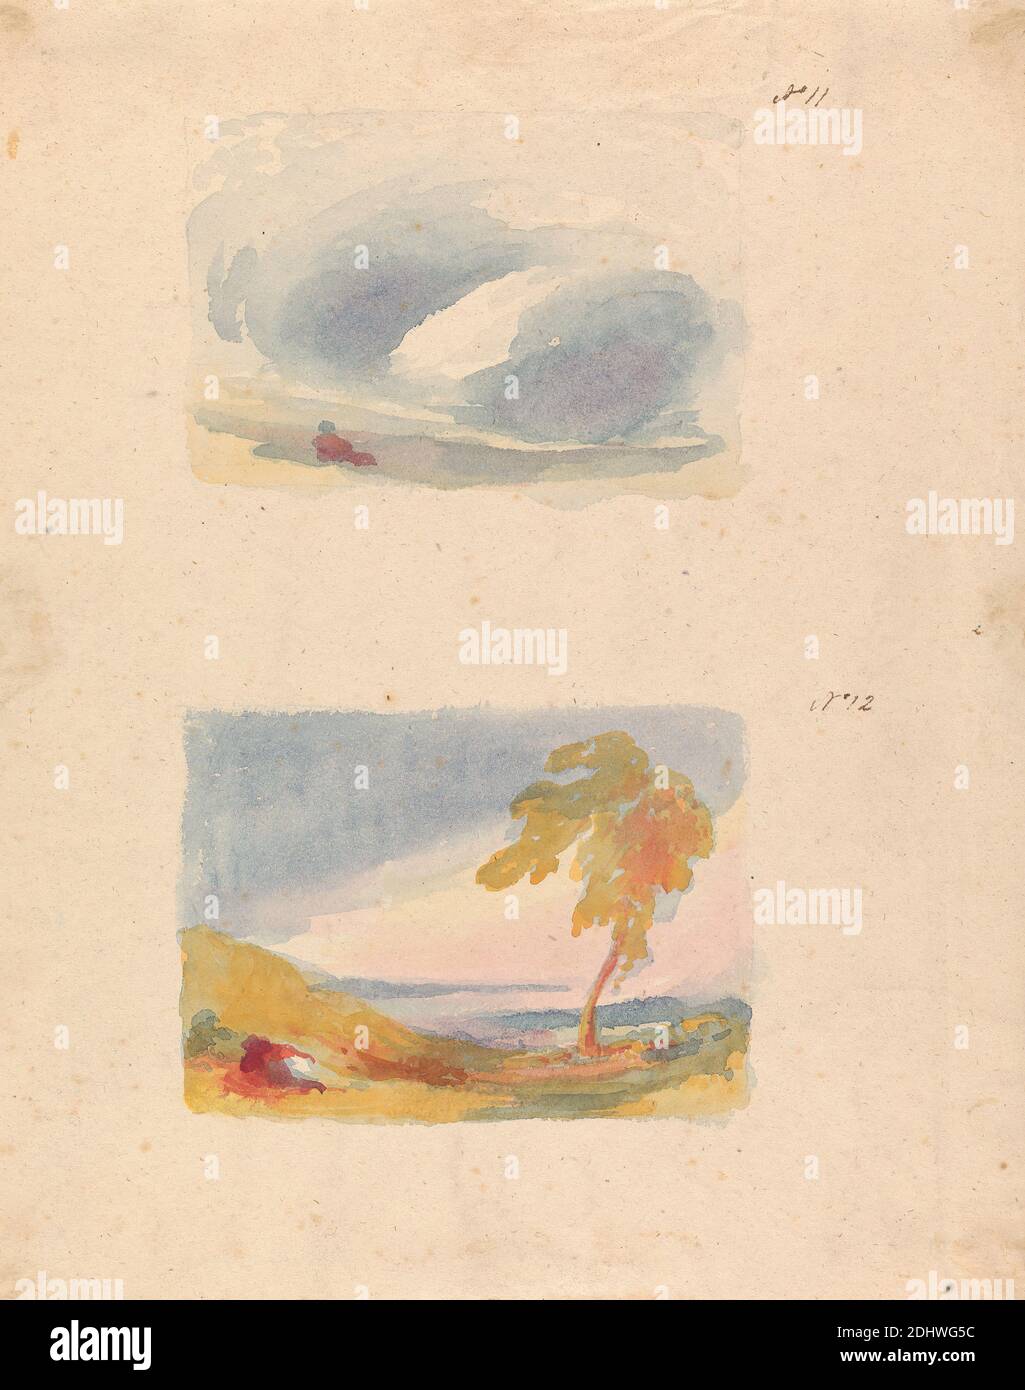 Two Drawings on One Sheet: Sky Study - Turner's Principle (no. 11); Landscape With Hills and Tree (no. 12), Thomas Sully, 1783–1872, American, undated, Watercolor on medium, slightly textured, beige, wove paper, Sheet: 10 15/16 × 8 11/16 inches (27.8 × 22.1 cm Stock Photo